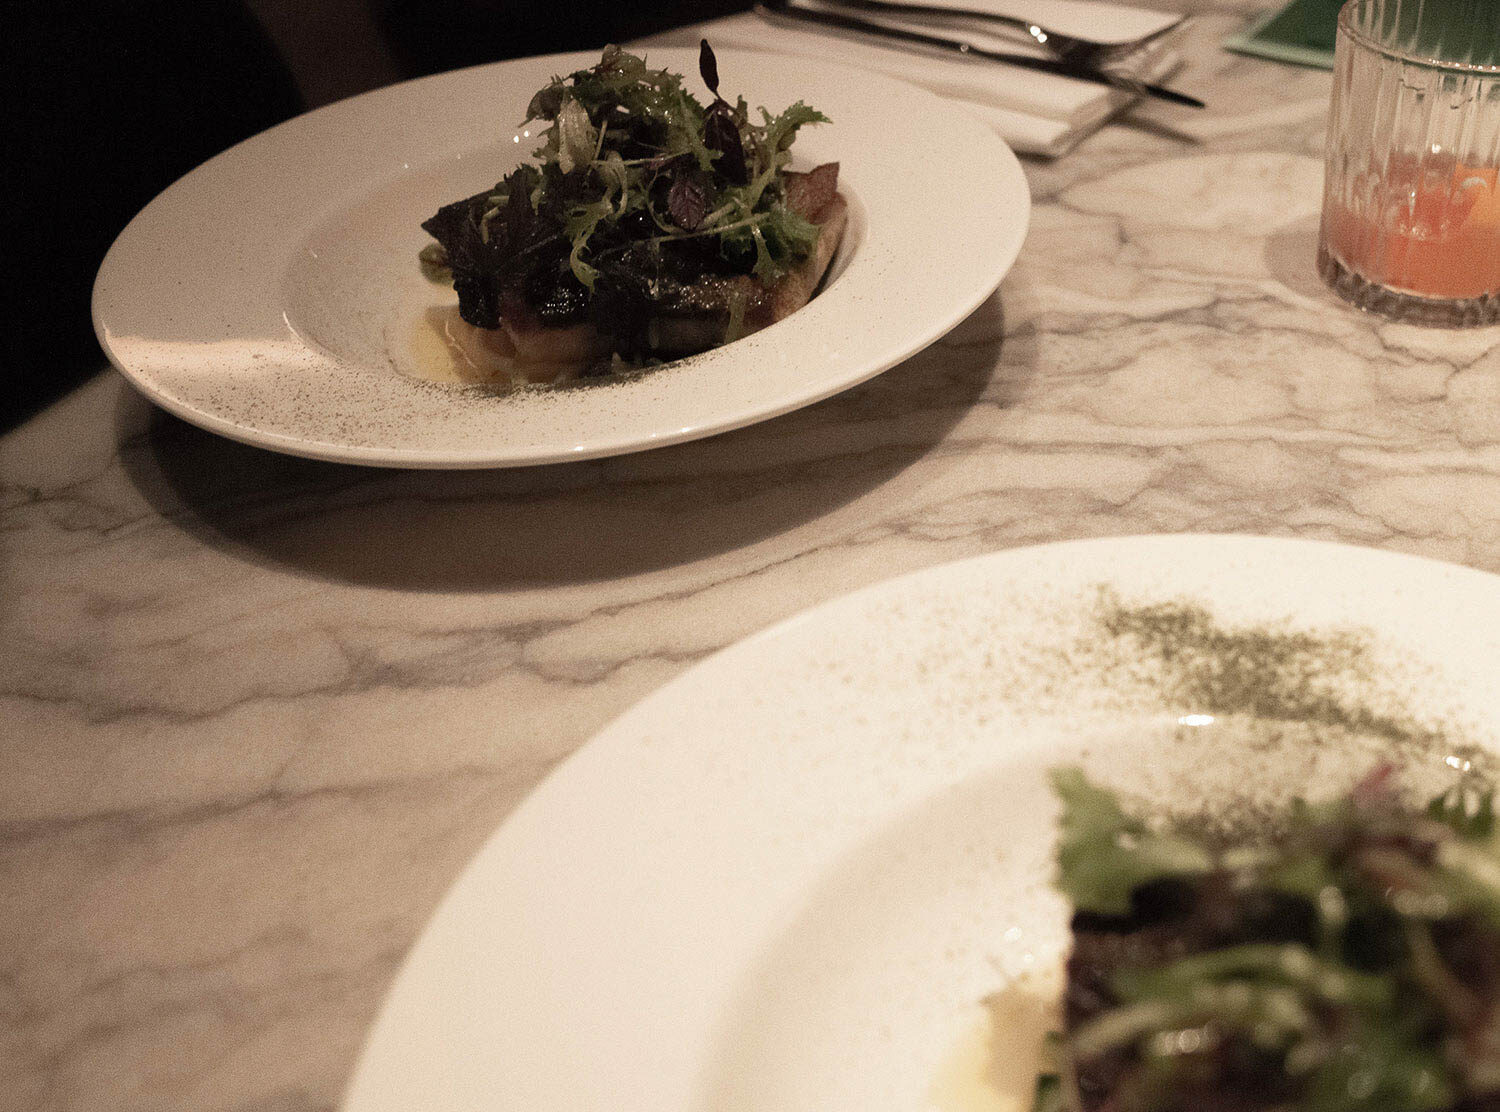 Ace Hotel Sydney Loam fare is contemporary Australian food, clean, modern, and only the freshest produce